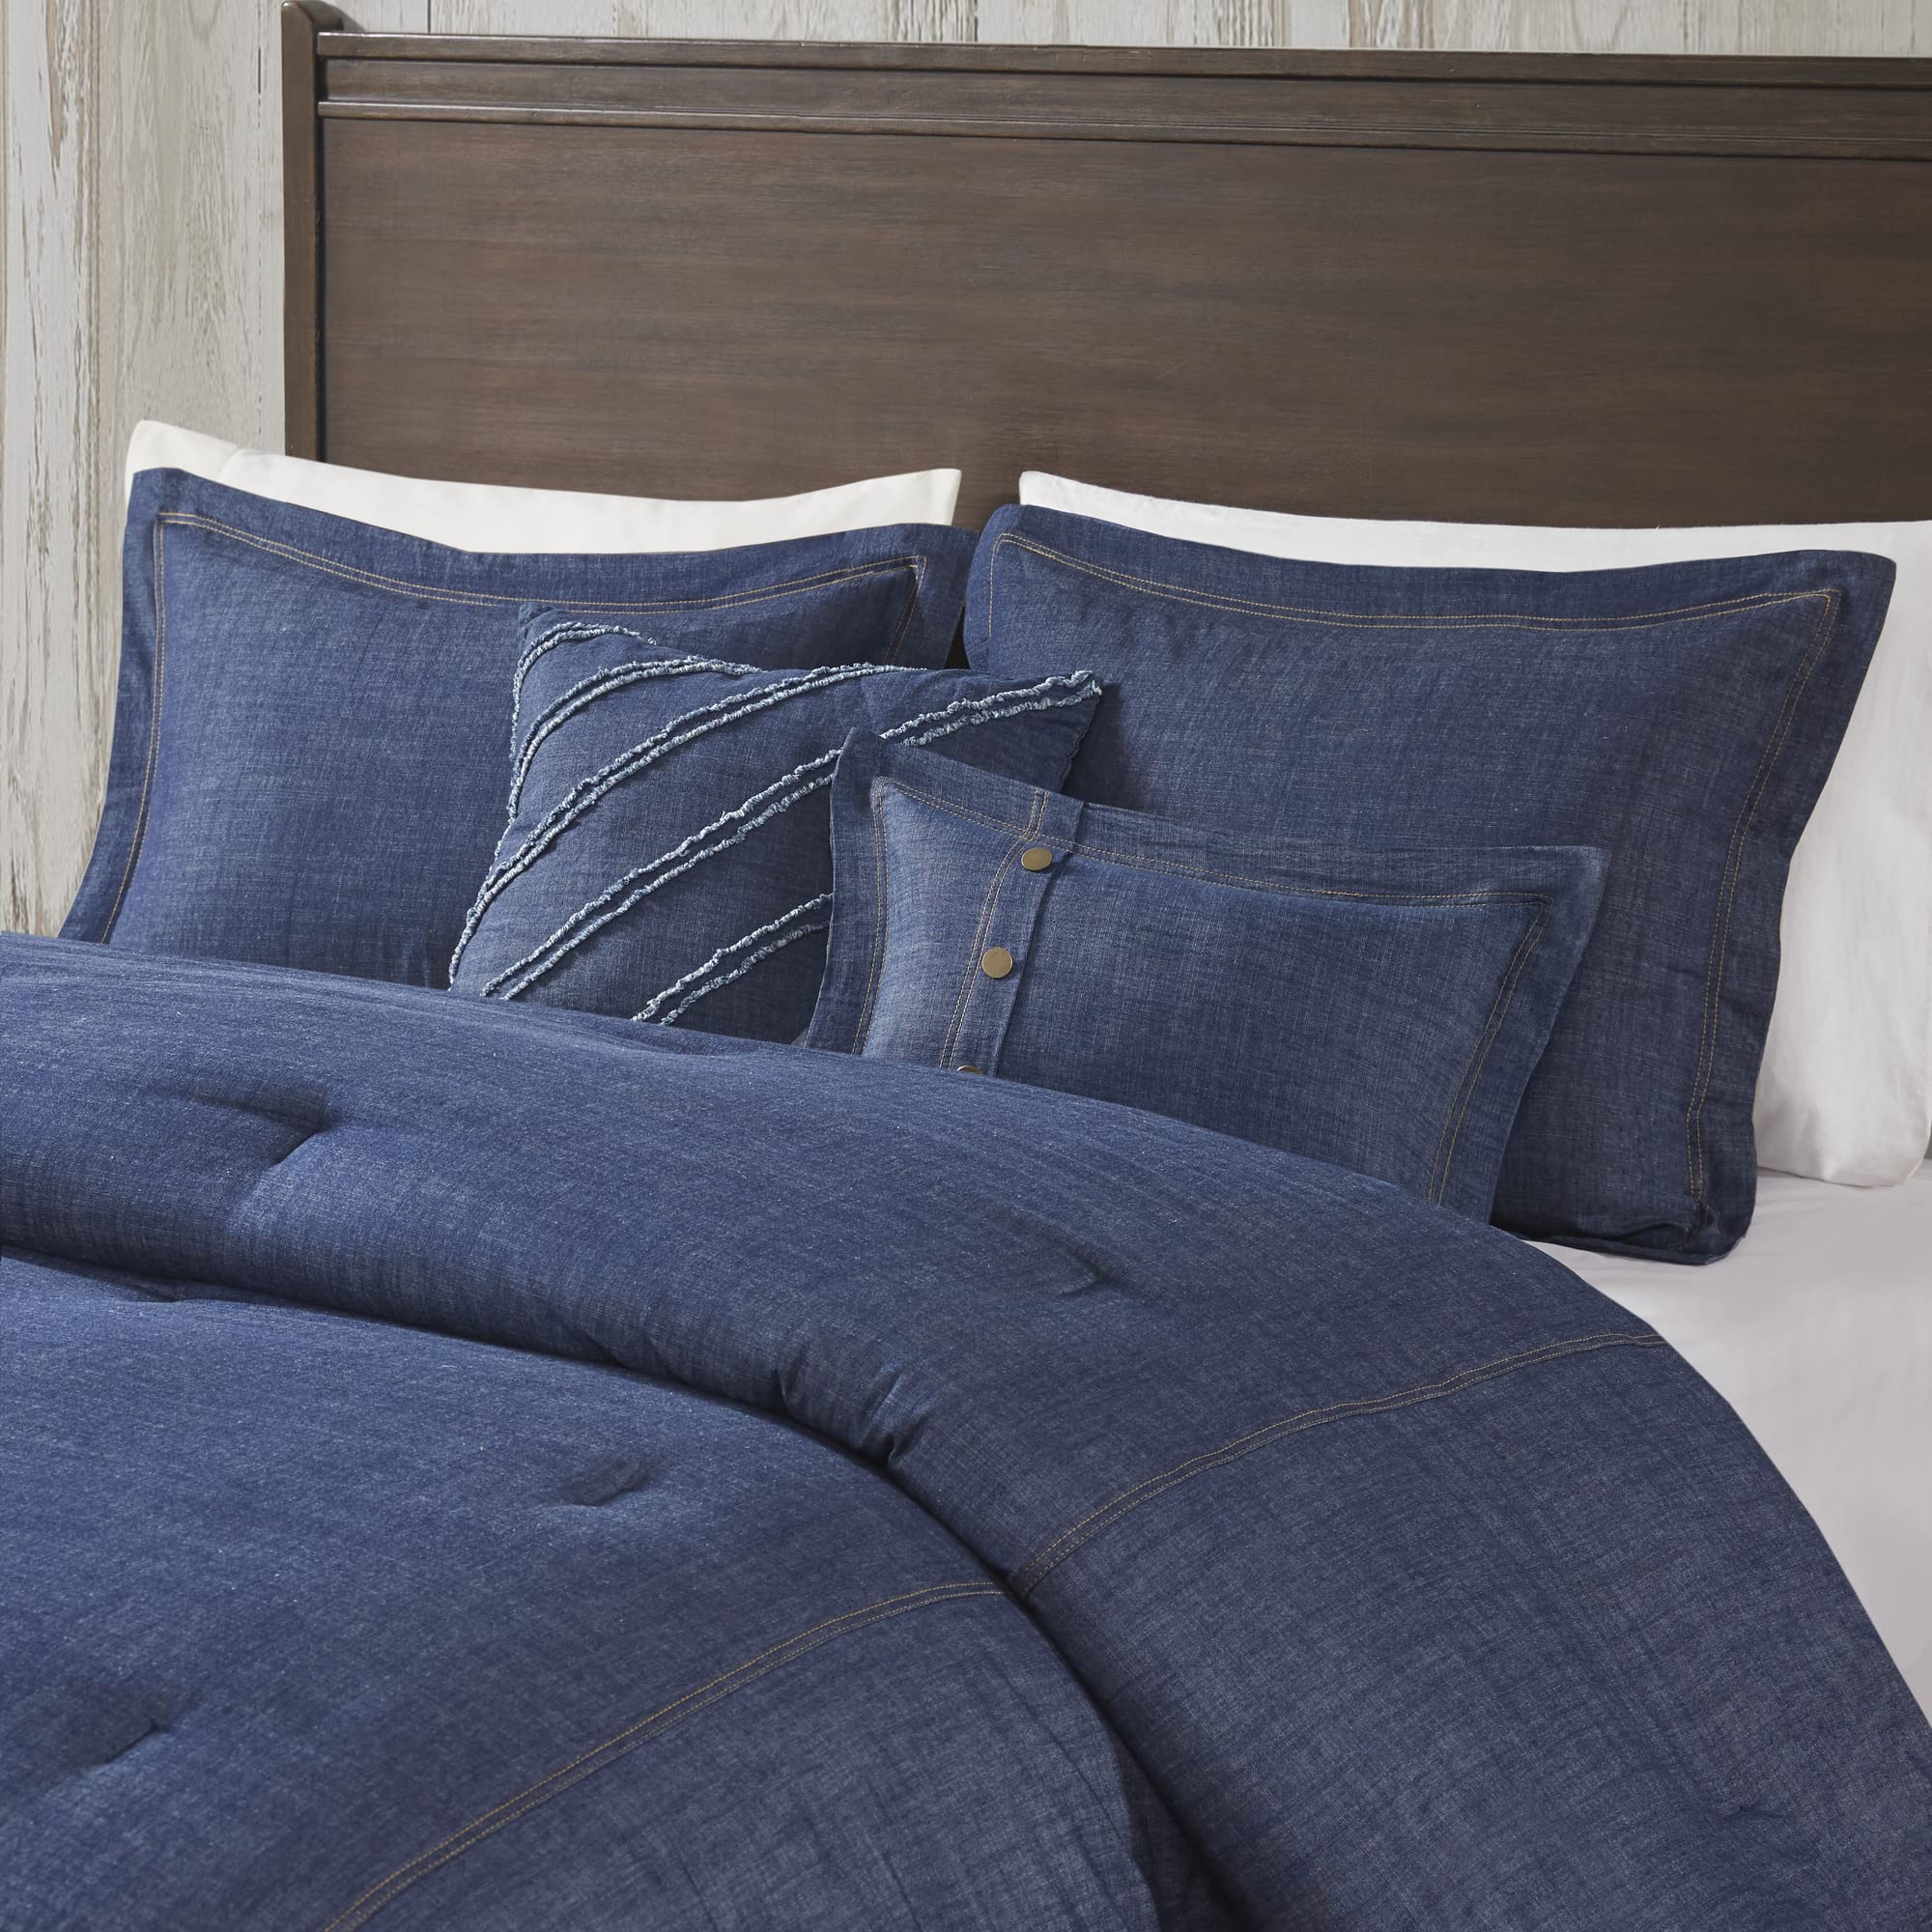 Woolrich Rustic Lodge Cabin Comforter Set - All Season Down Alternative Warm Bedding Layer and Matching Shams, Oversized King, Perry, Denim Blue